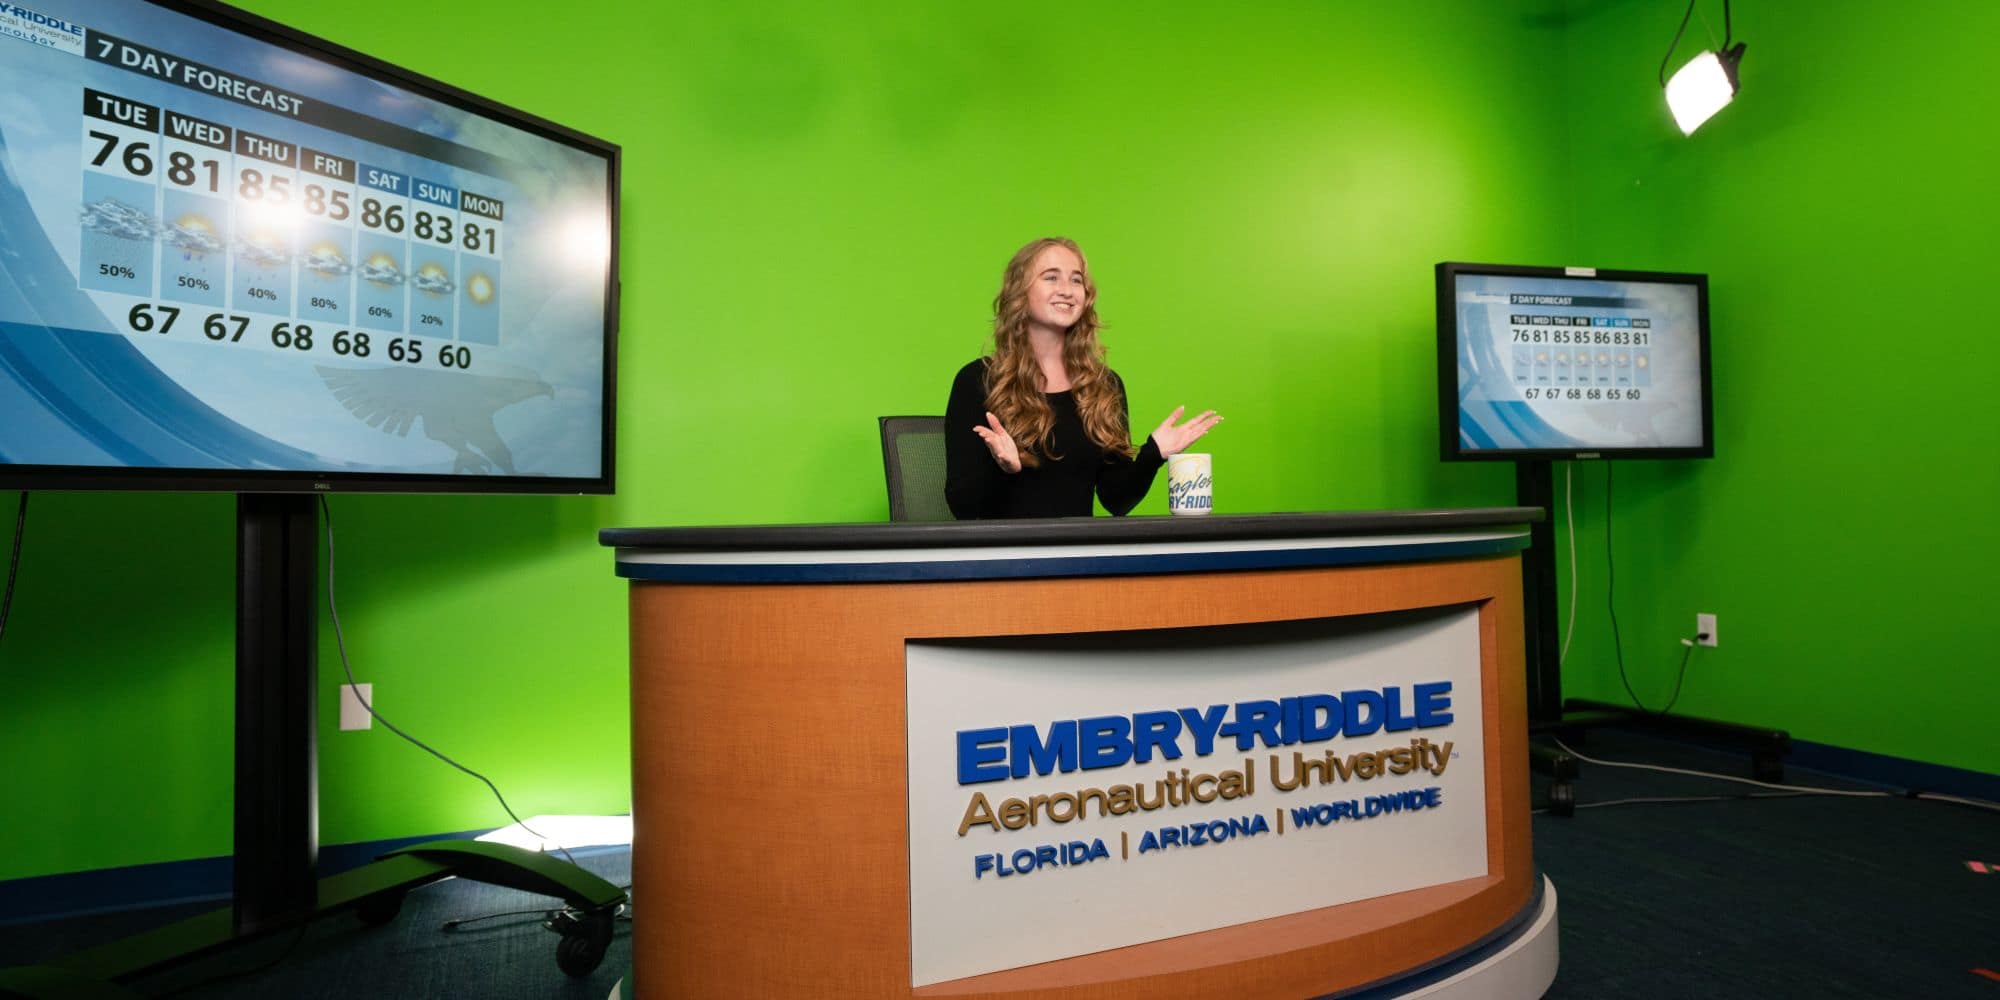 Danielle Van Pelt sharing today’s forecast on the Embry-Riddle campus. (Photo: Embry-Riddle / Joseph Harrison)